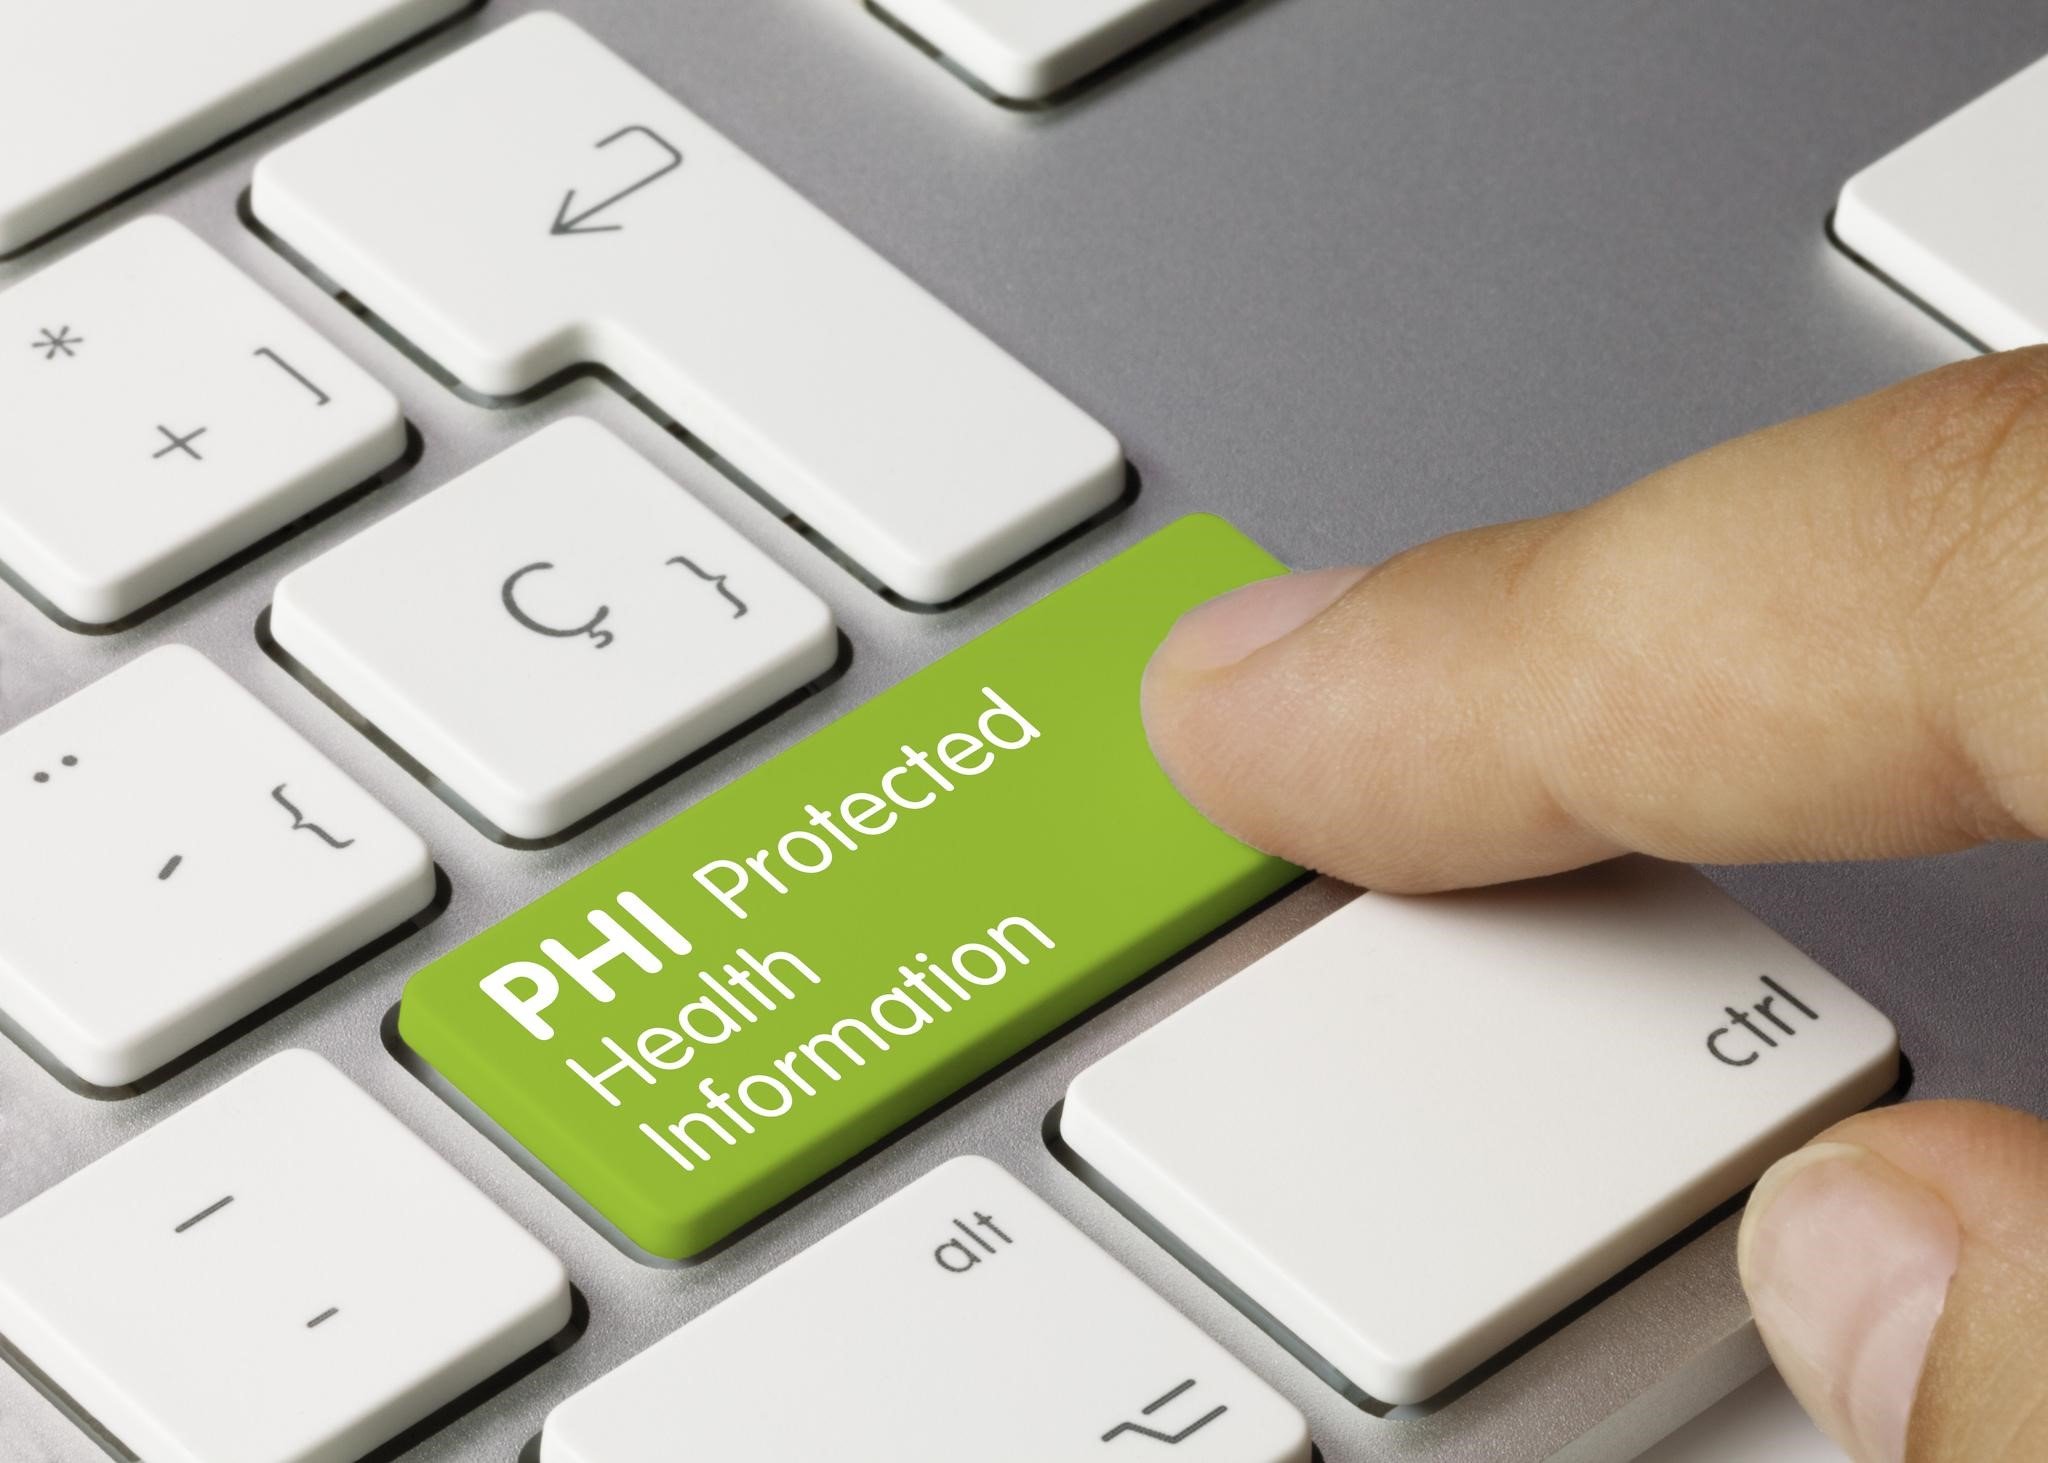 Recommendations for Health Care Organizations to Protect PHI